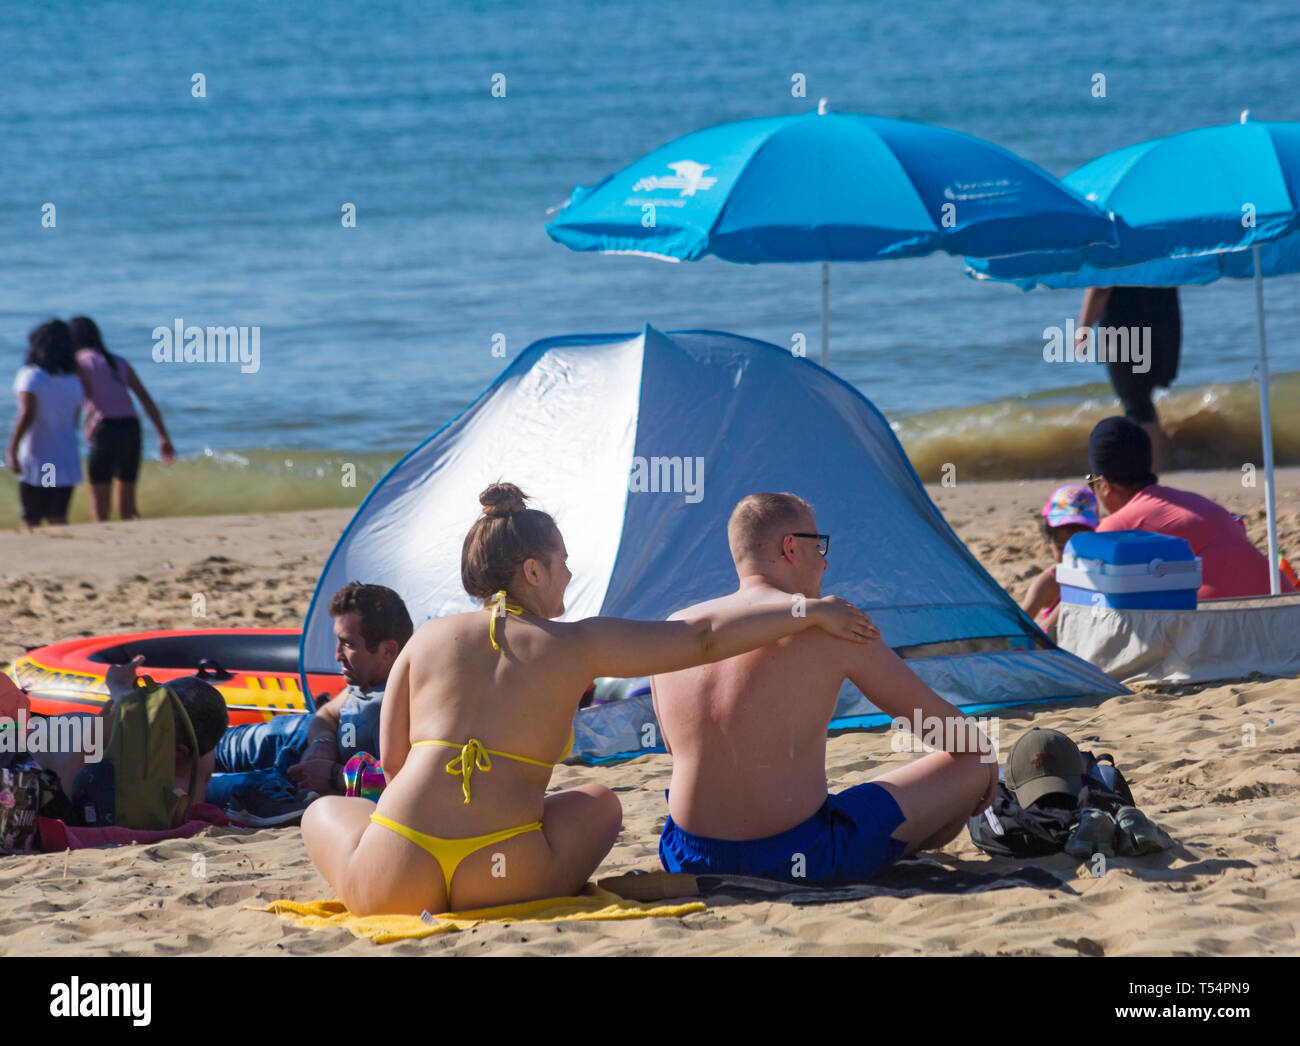 https://c8.alamy.com/comp/T54PN9/bournemouth-dorset-uk-21st-apr-2019-uk-weather-the-heatwave-continues-with-hot-and-sunny-weather-as-beachgoers-head-to-the-seaside-to-enjoy-the-heat-and-sunshine-at-bournemouth-beaches-for-the-easter-holidays-mid-morning-and-already-beaches-are-getting-packed-as-sunseekers-get-there-early-to-get-their-space-young-woman-wearing-thong-bikini-rubbing-in-sun-tan-lotion-on-mans-back-credit-carolyn-jenkinsalamy-live-news-T54PN9.jpg